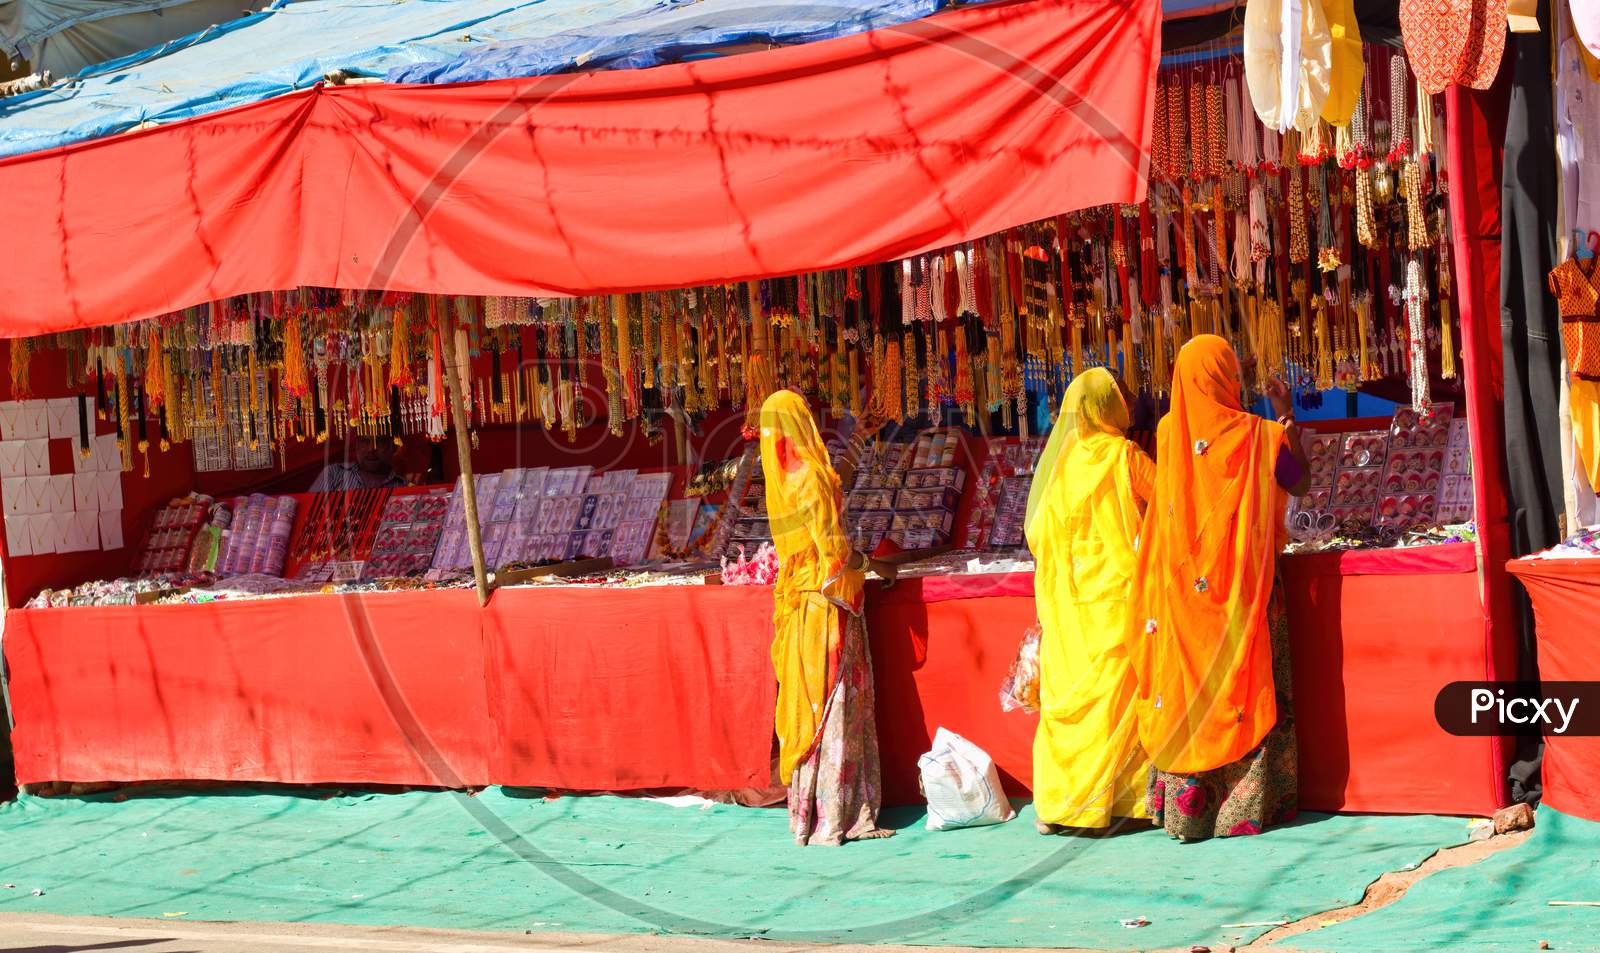 Pushkar, India - November 10, 2016: Bunch Of Women In Traditional Hindu Wear Saree Buying Or Shopping Jewelery Items In The Commercial Street Of Pushkar Fair In The State Of Rajasthan